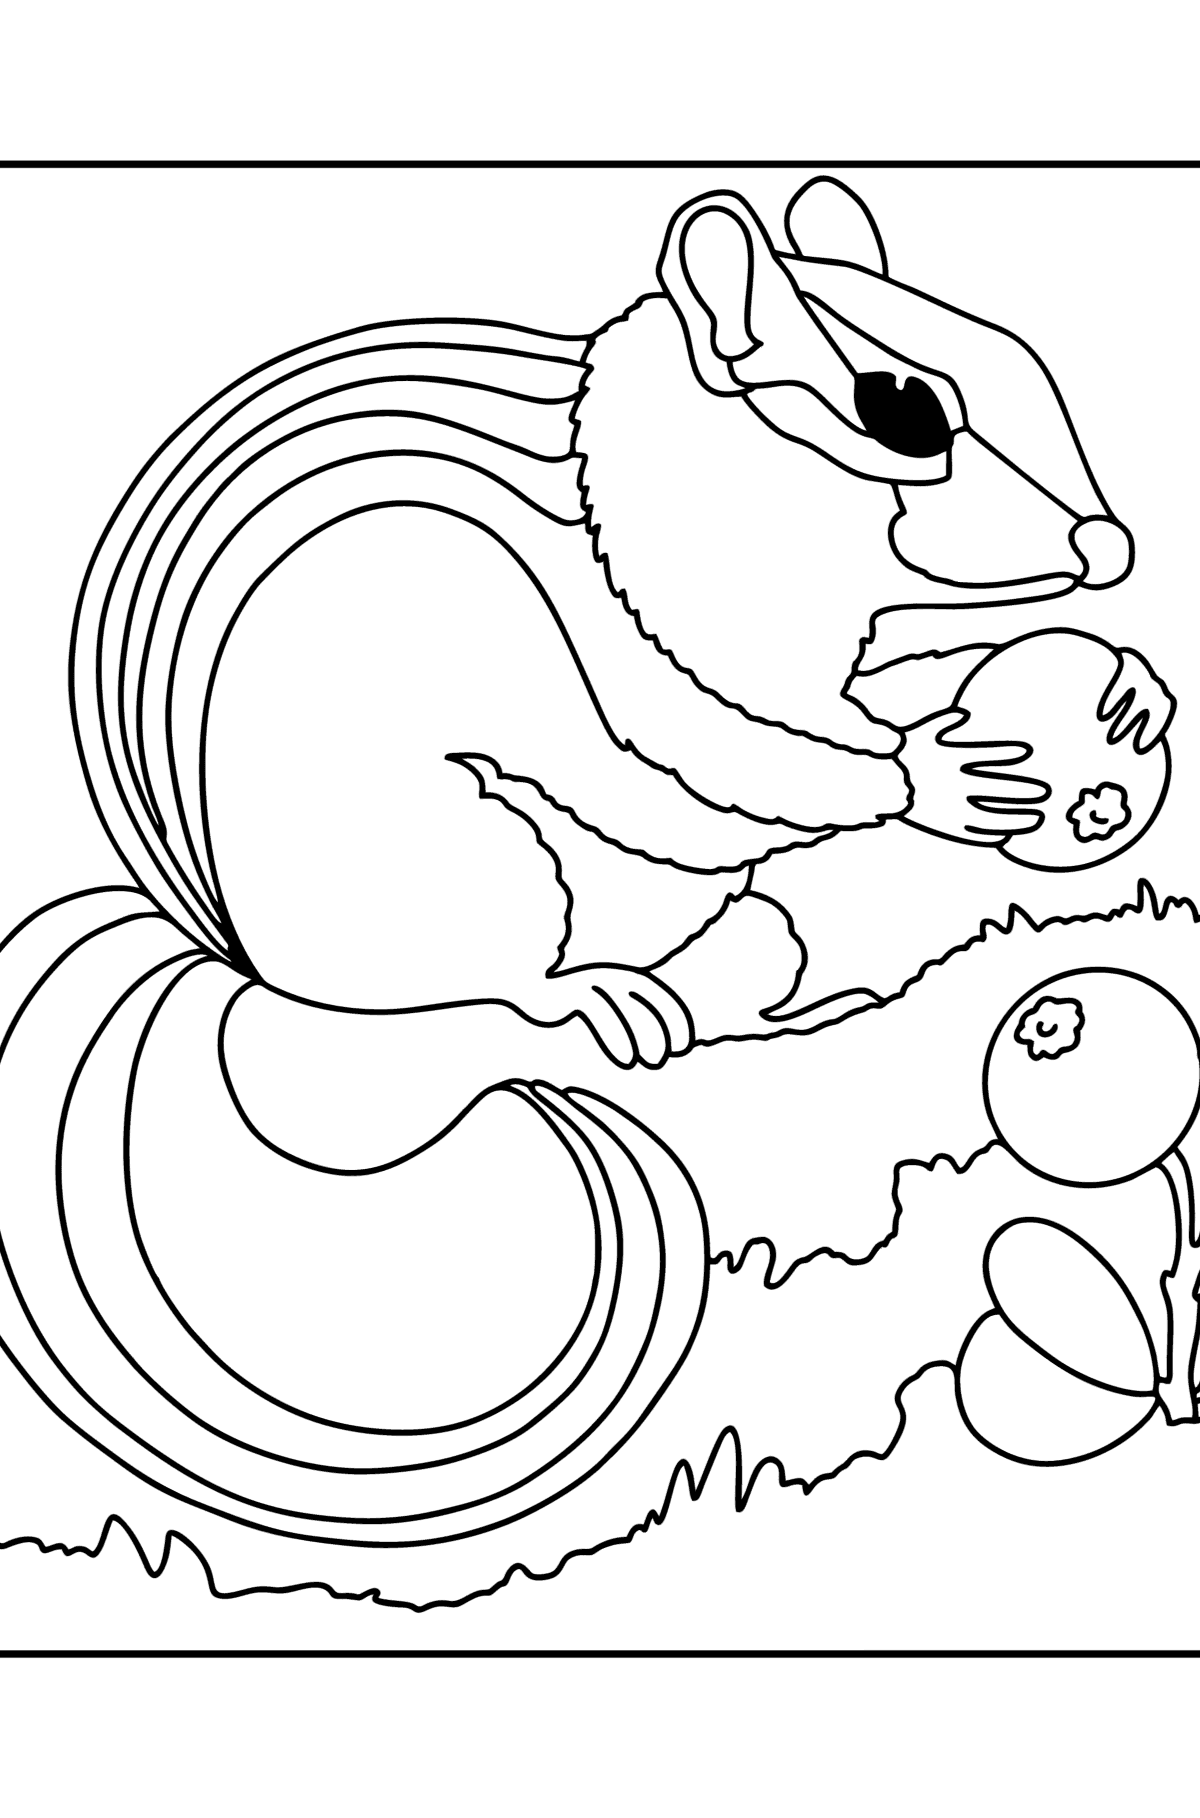 Chipmunk in the forest сoloring page - Coloring Pages for Kids